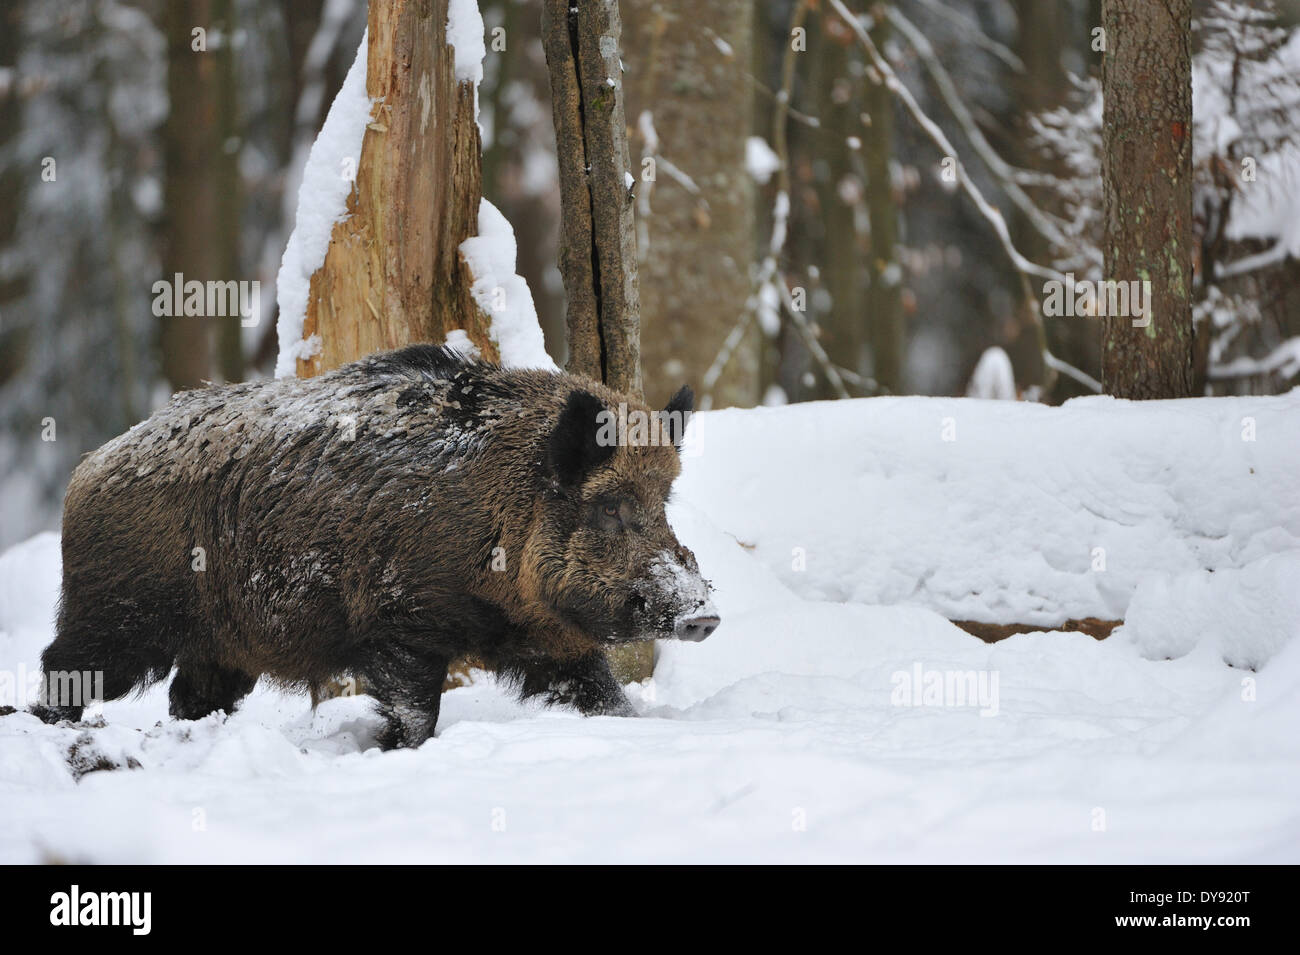 Wild boar Sus scrofa scrofa sow sows wild boars cloven-hoofed animal pigs pig vertebrates mammals wild boars snow spruce fores Stock Photo